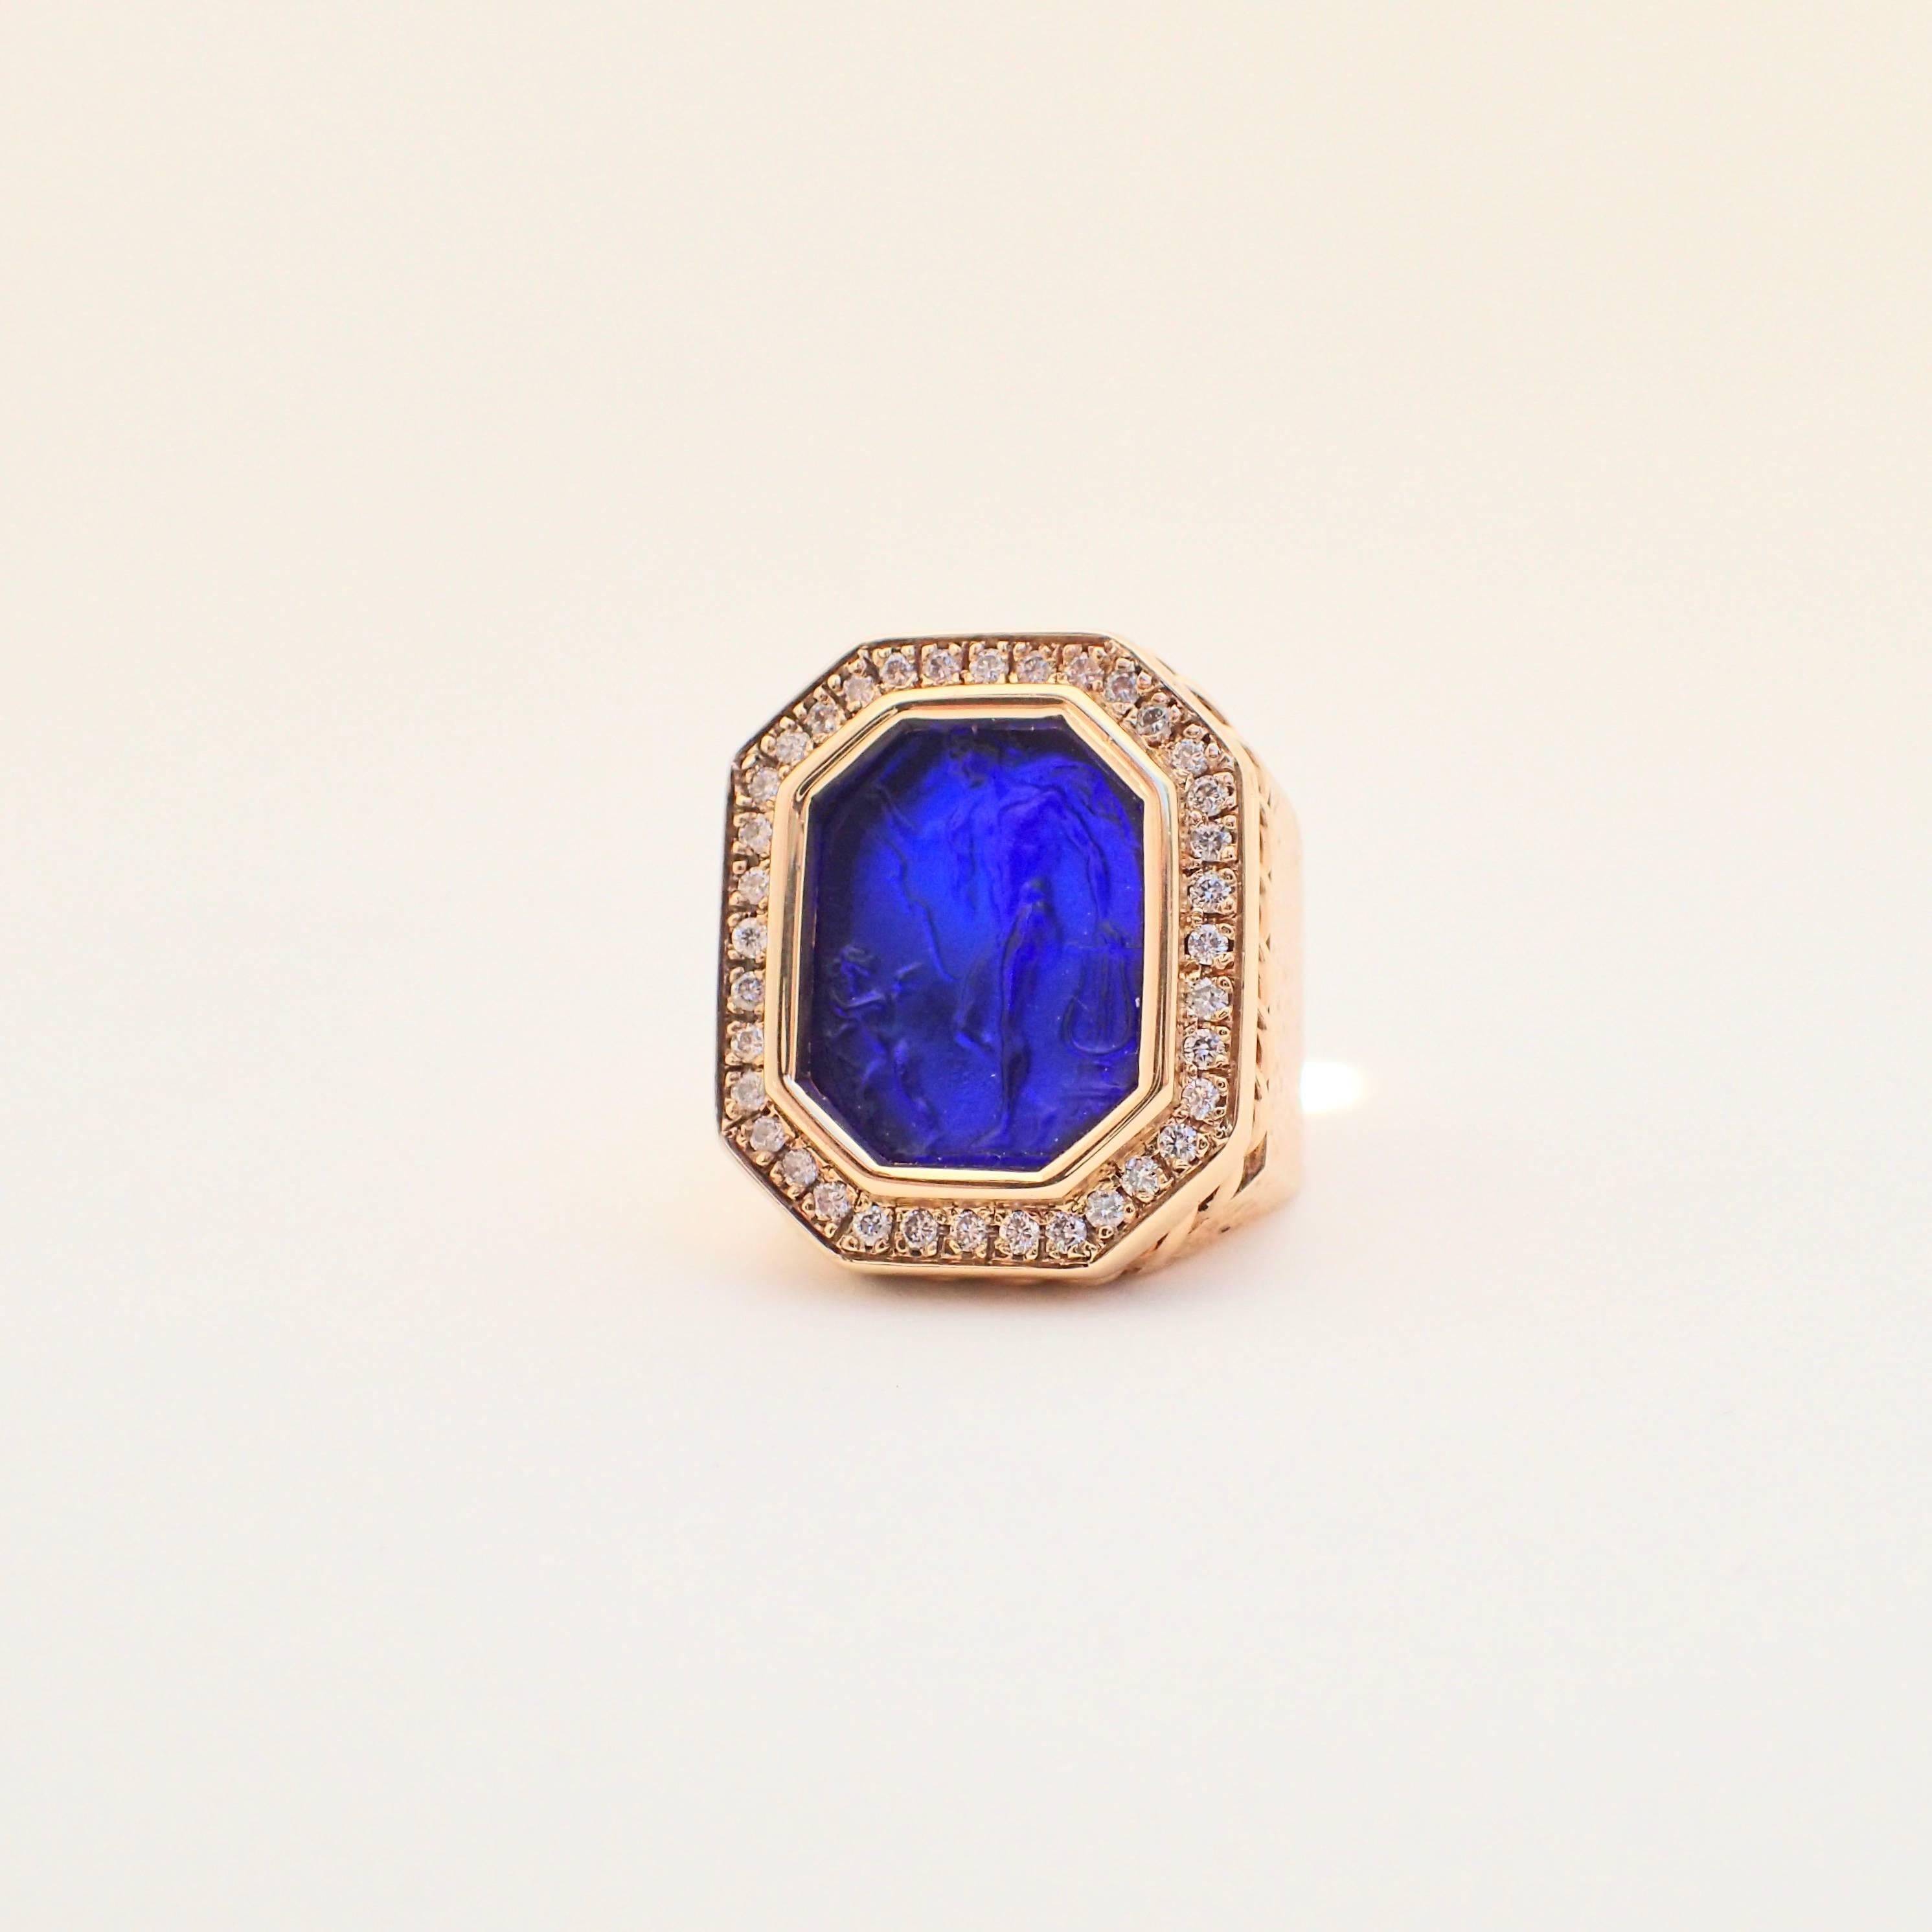 14 Karat Gold Hammered Texture Blue Intaglio Ring with 0.43 Carat of Diamond For Sale 15